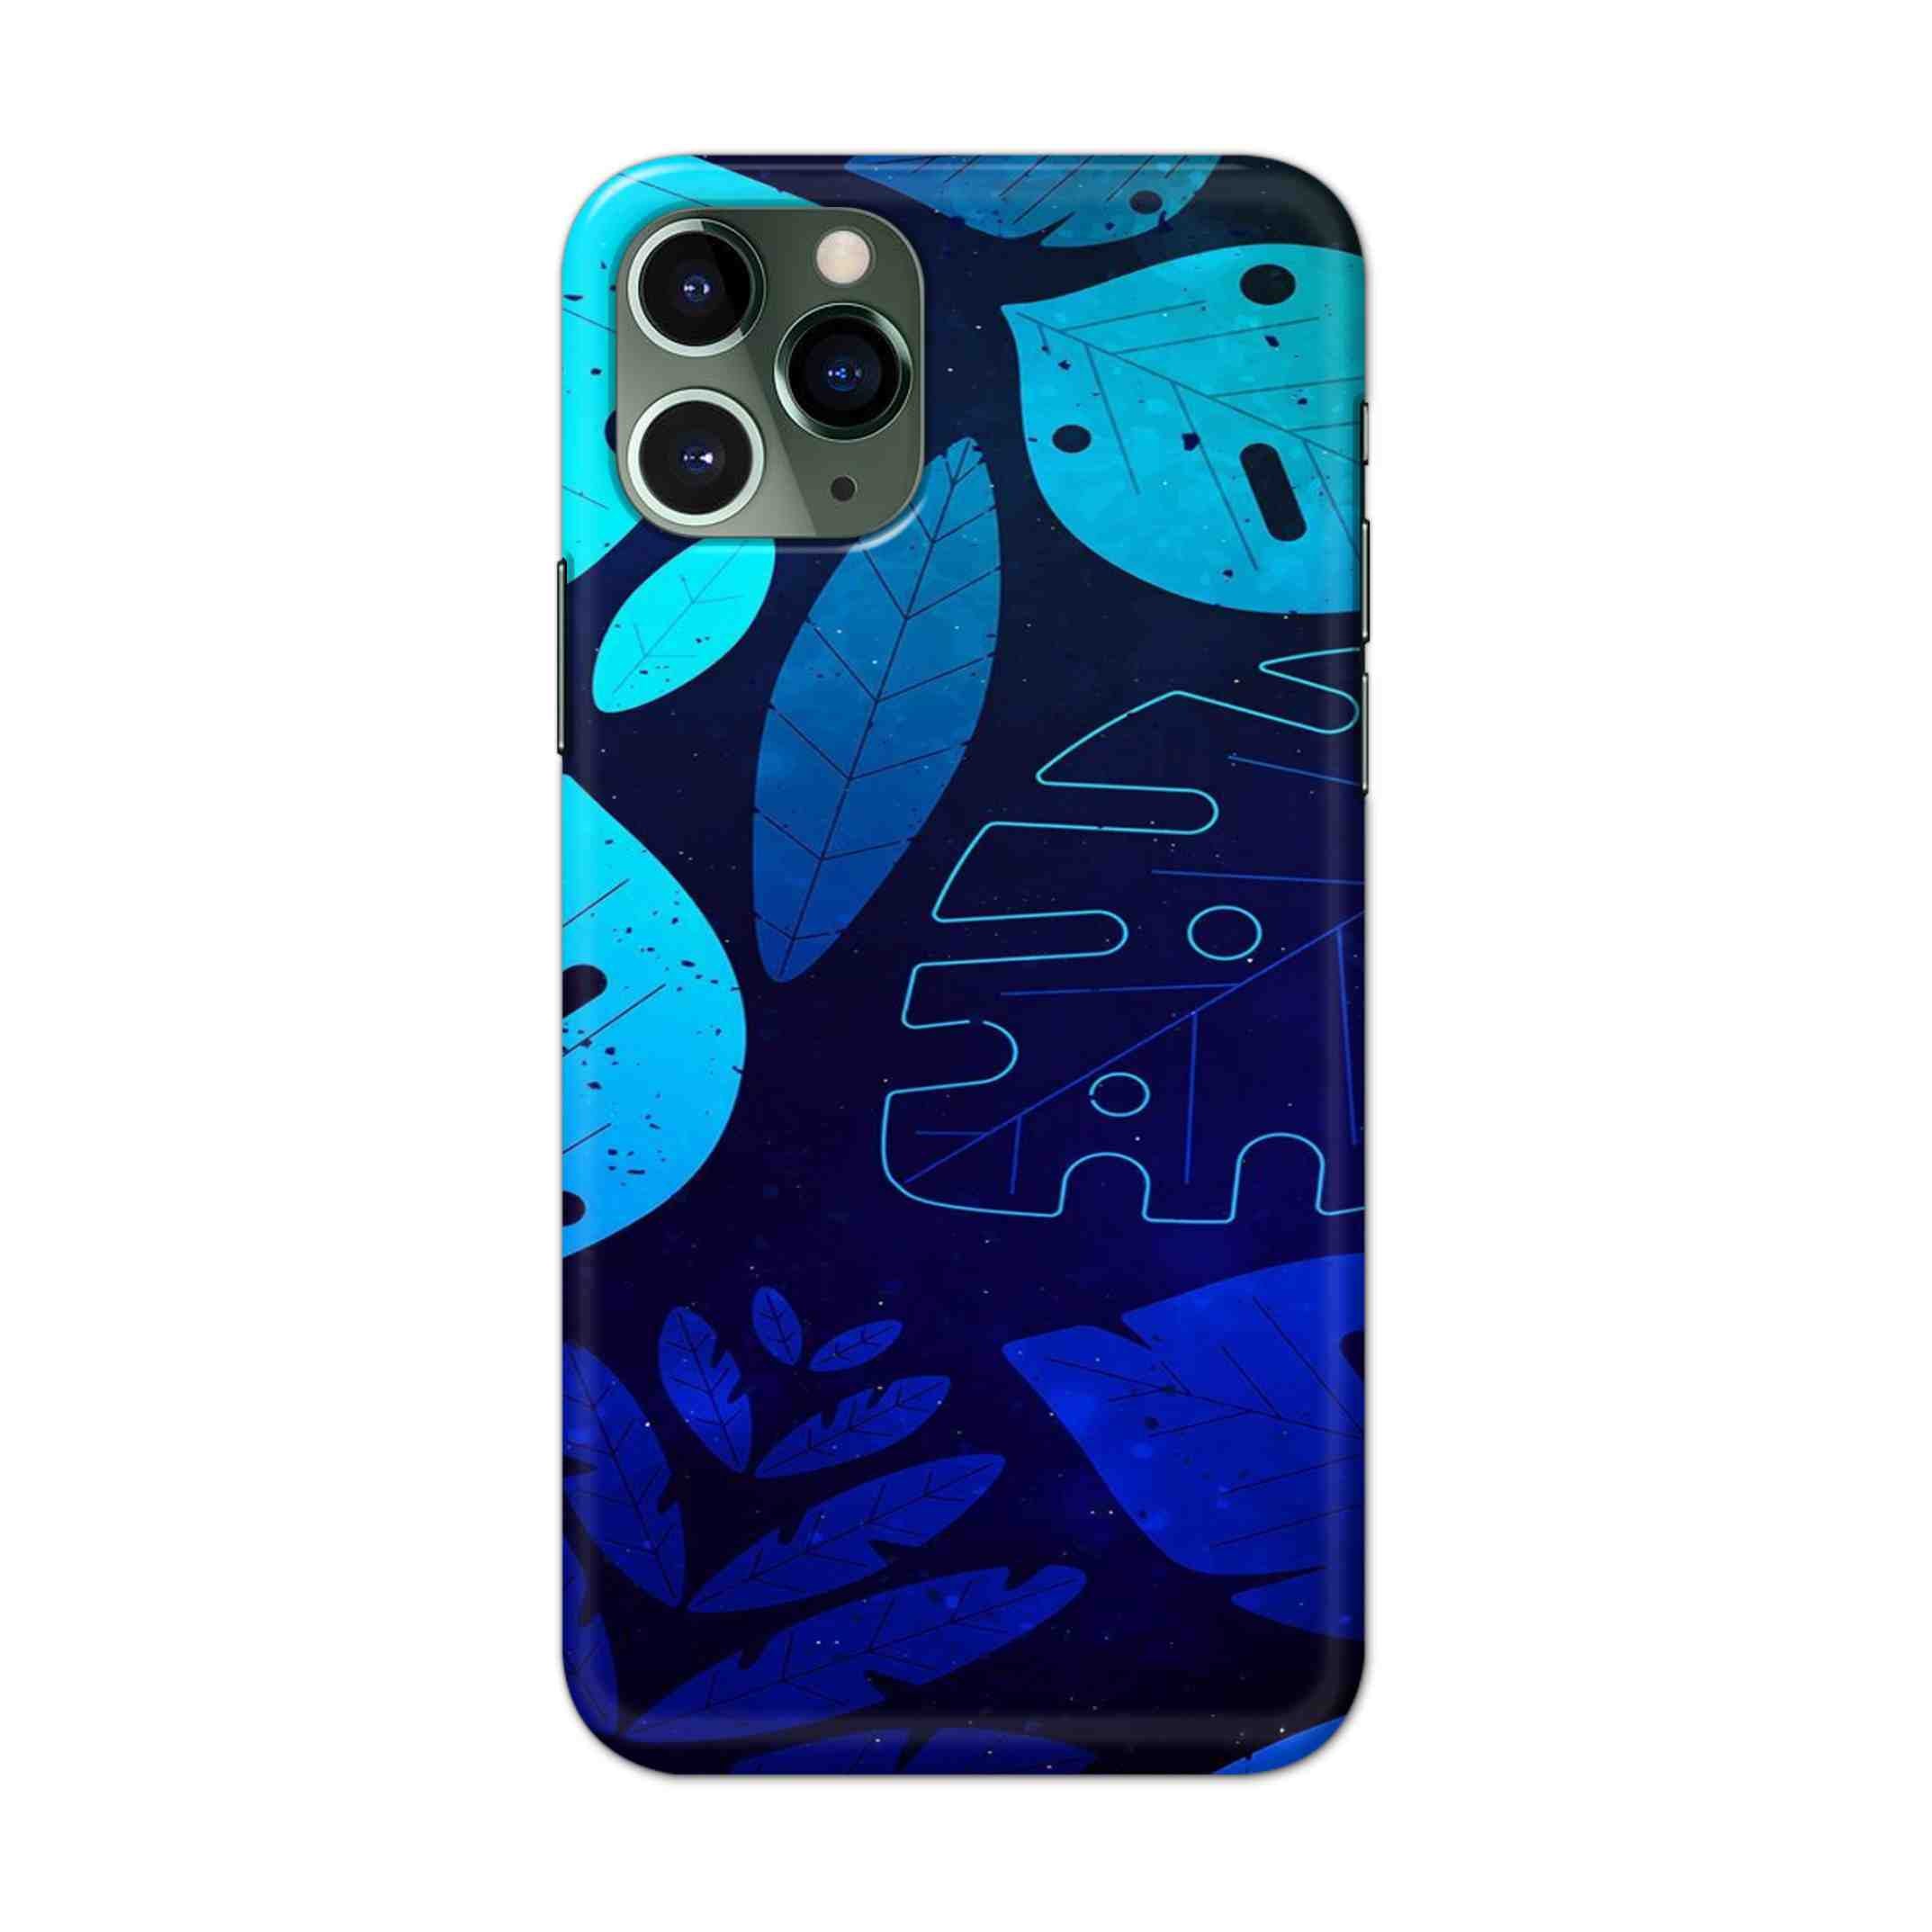 Buy Neon Leaf Hard Back Mobile Phone Case/Cover For iPhone 11 Pro Online